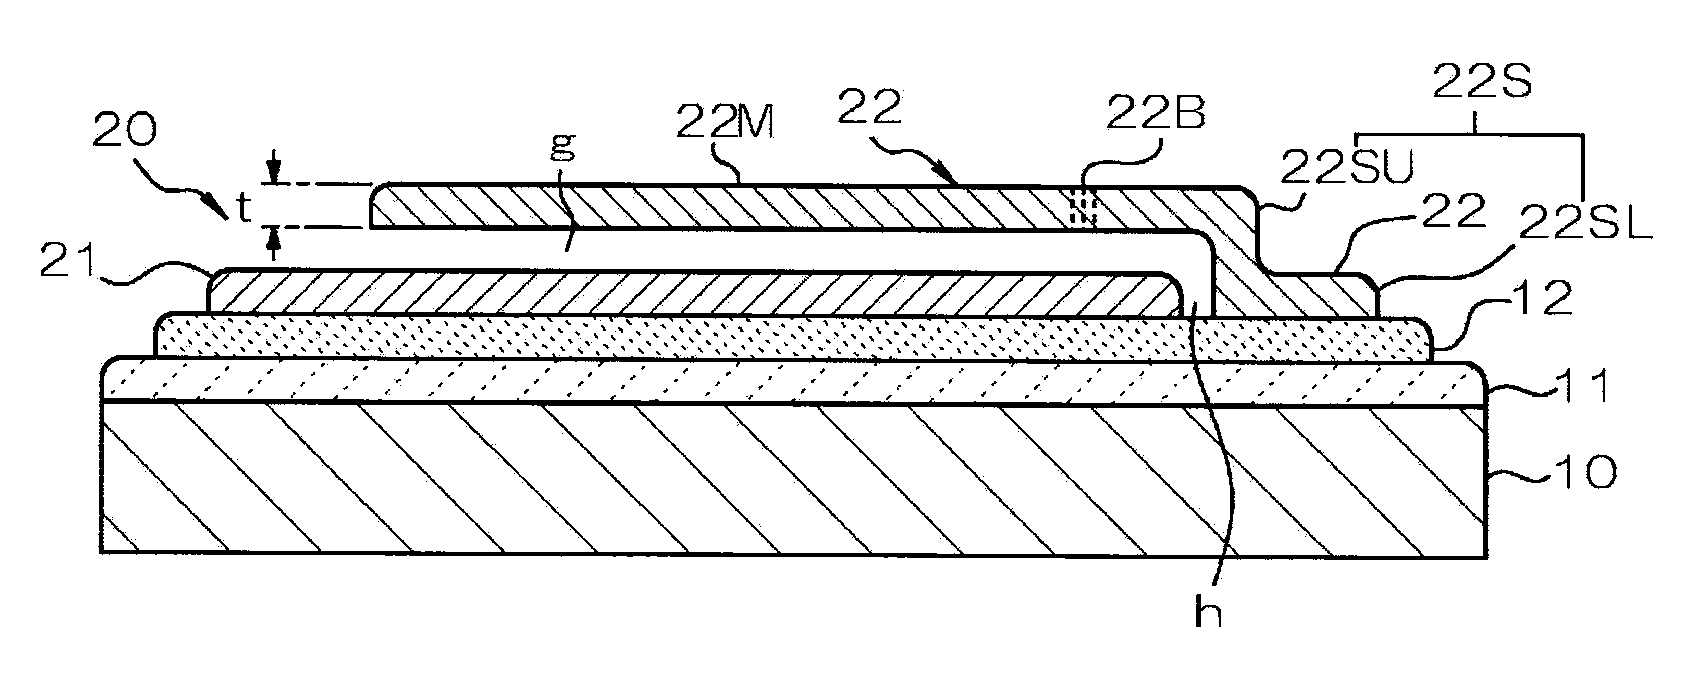 MEMS device and method for manufacturing the same